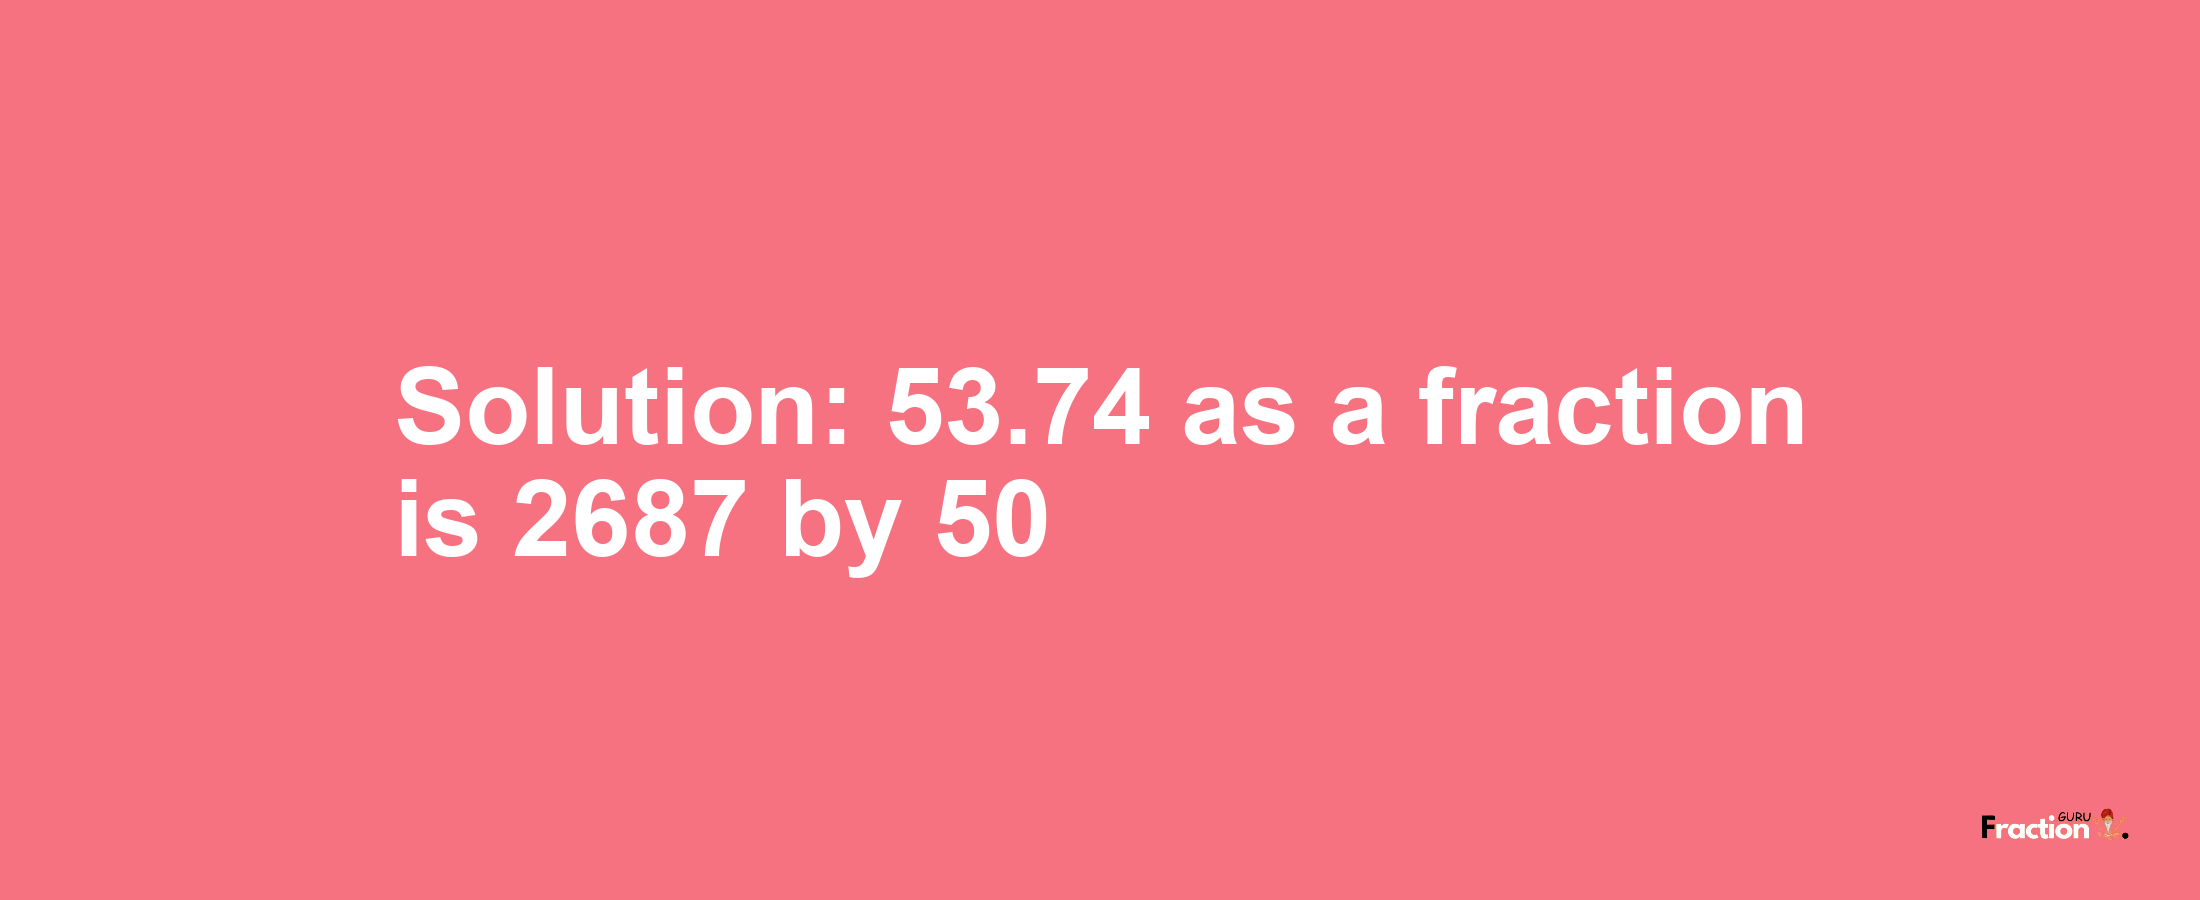 Solution:53.74 as a fraction is 2687/50